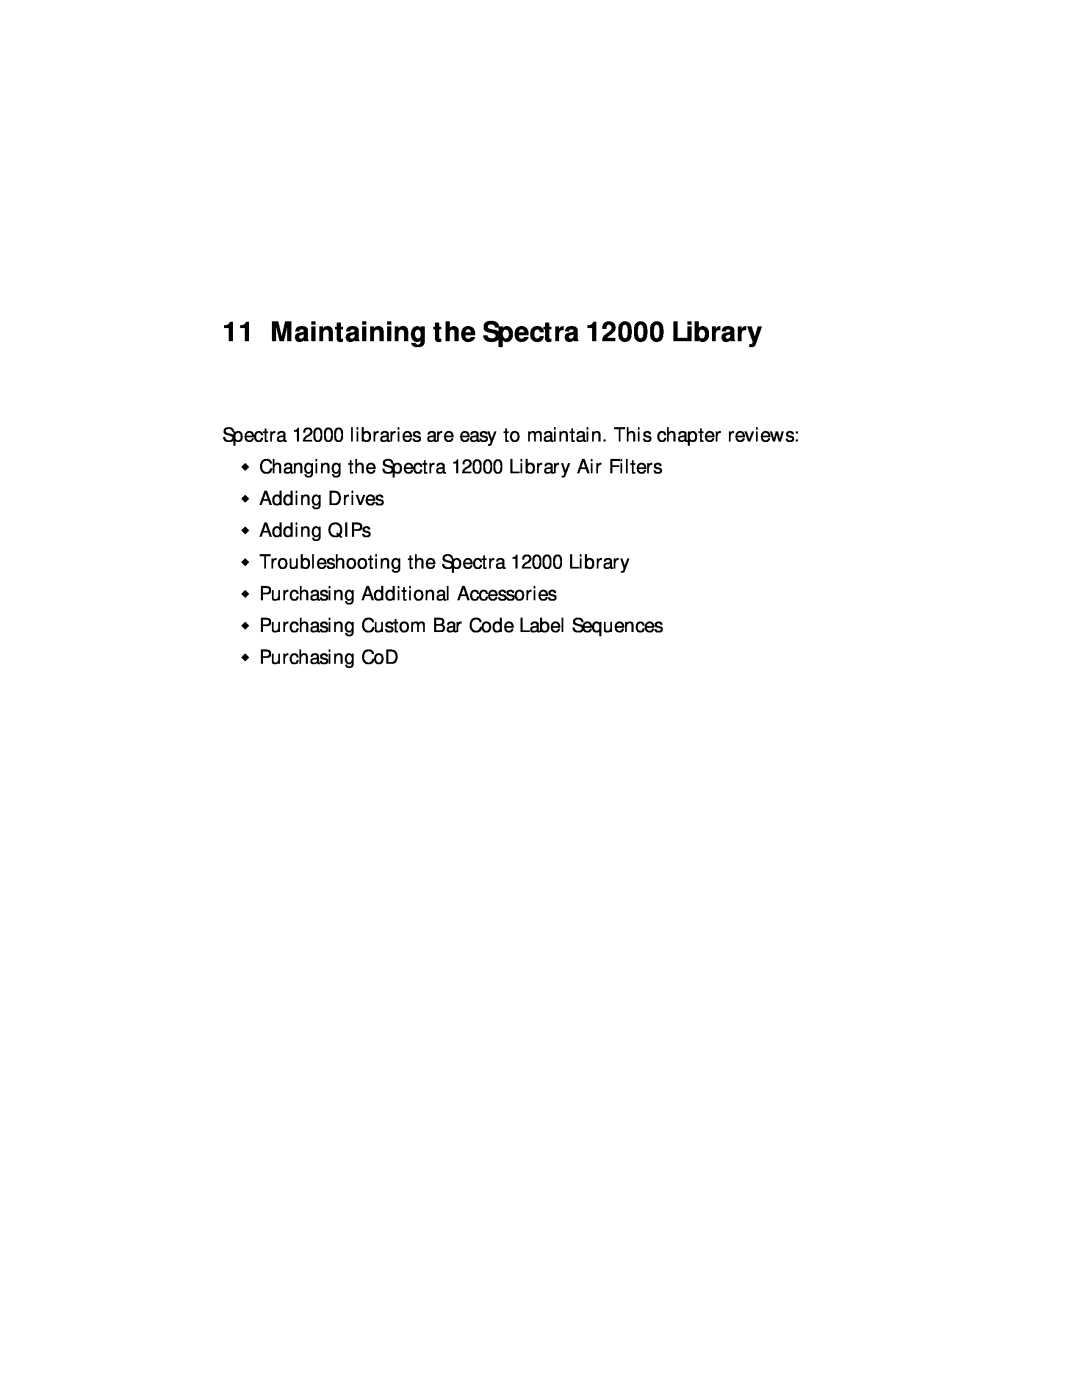 Spectra Logic Maintaining the Spectra 12000 Library, Spectra 12000 libraries are easy to maintain. This chapter reviews 